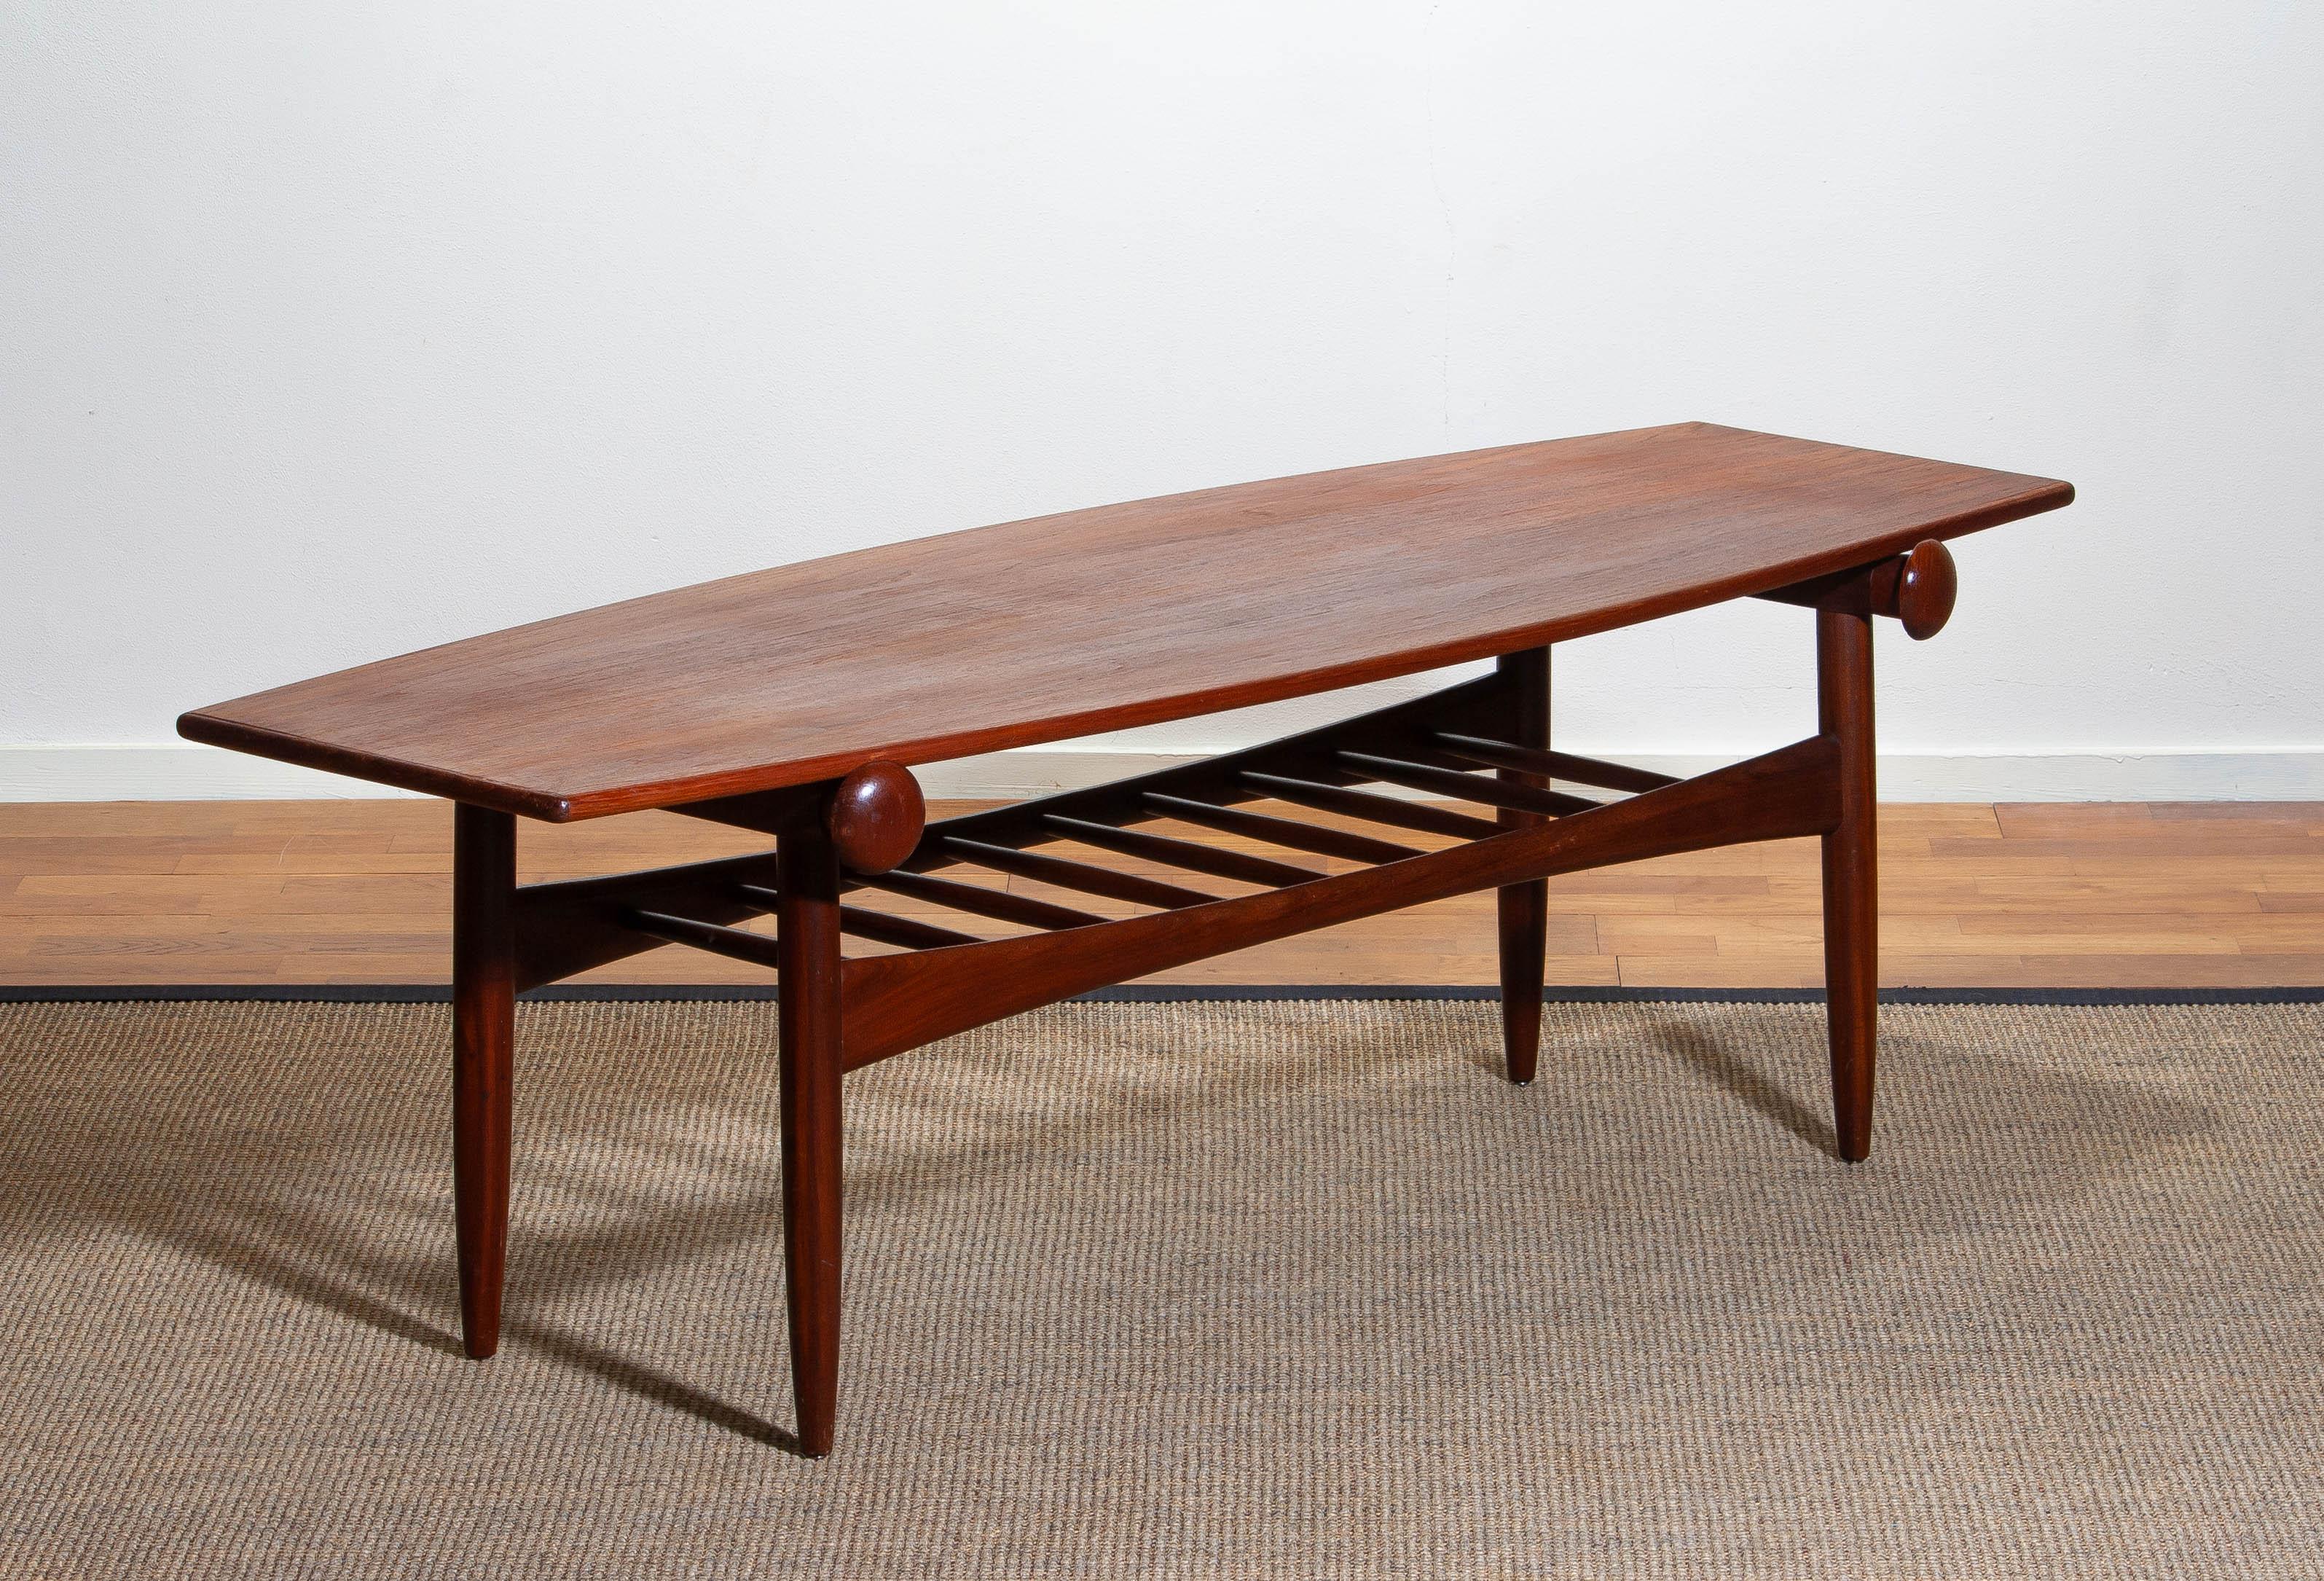 Beautiful teak and walnut coffee table from the 1960s.
The ellipse / surfboard shaped tabletop is reversible so you can choose the top
in white Formica or in teak.
The overall condition is good.